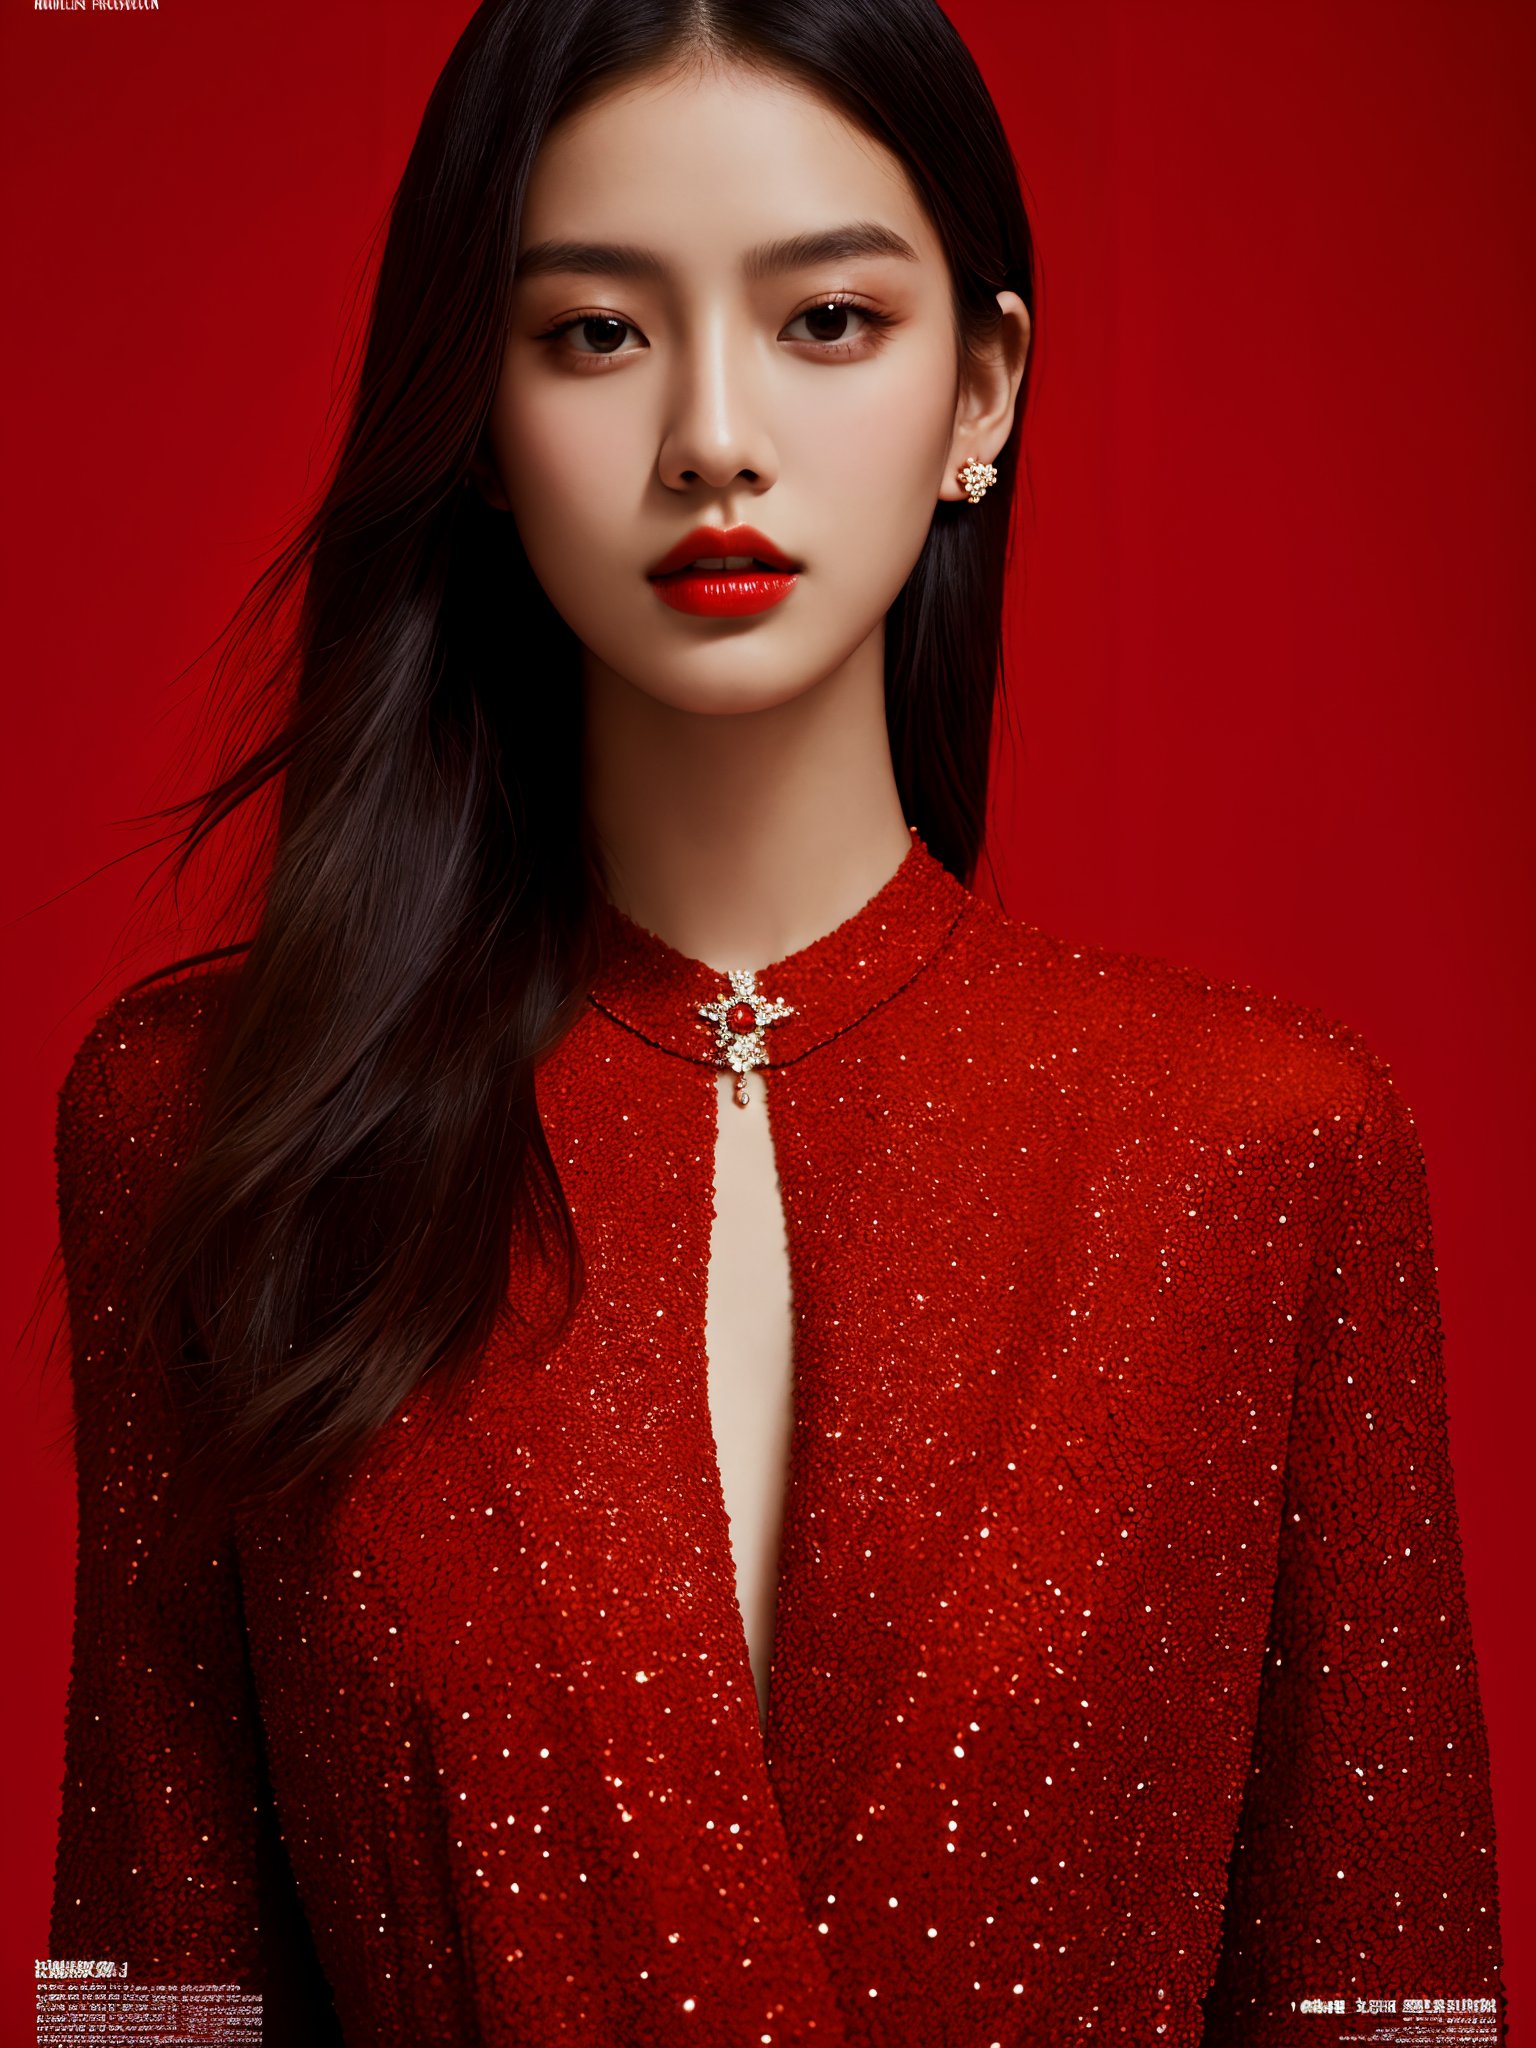 high quality,masterpiece,professional photography,perfect lighting,fashionista,fashion magazines,id magazine,supermodel,Jewelry,luxury goods,fashion magazine,edition,by Jay Huang,red theme, texture skin